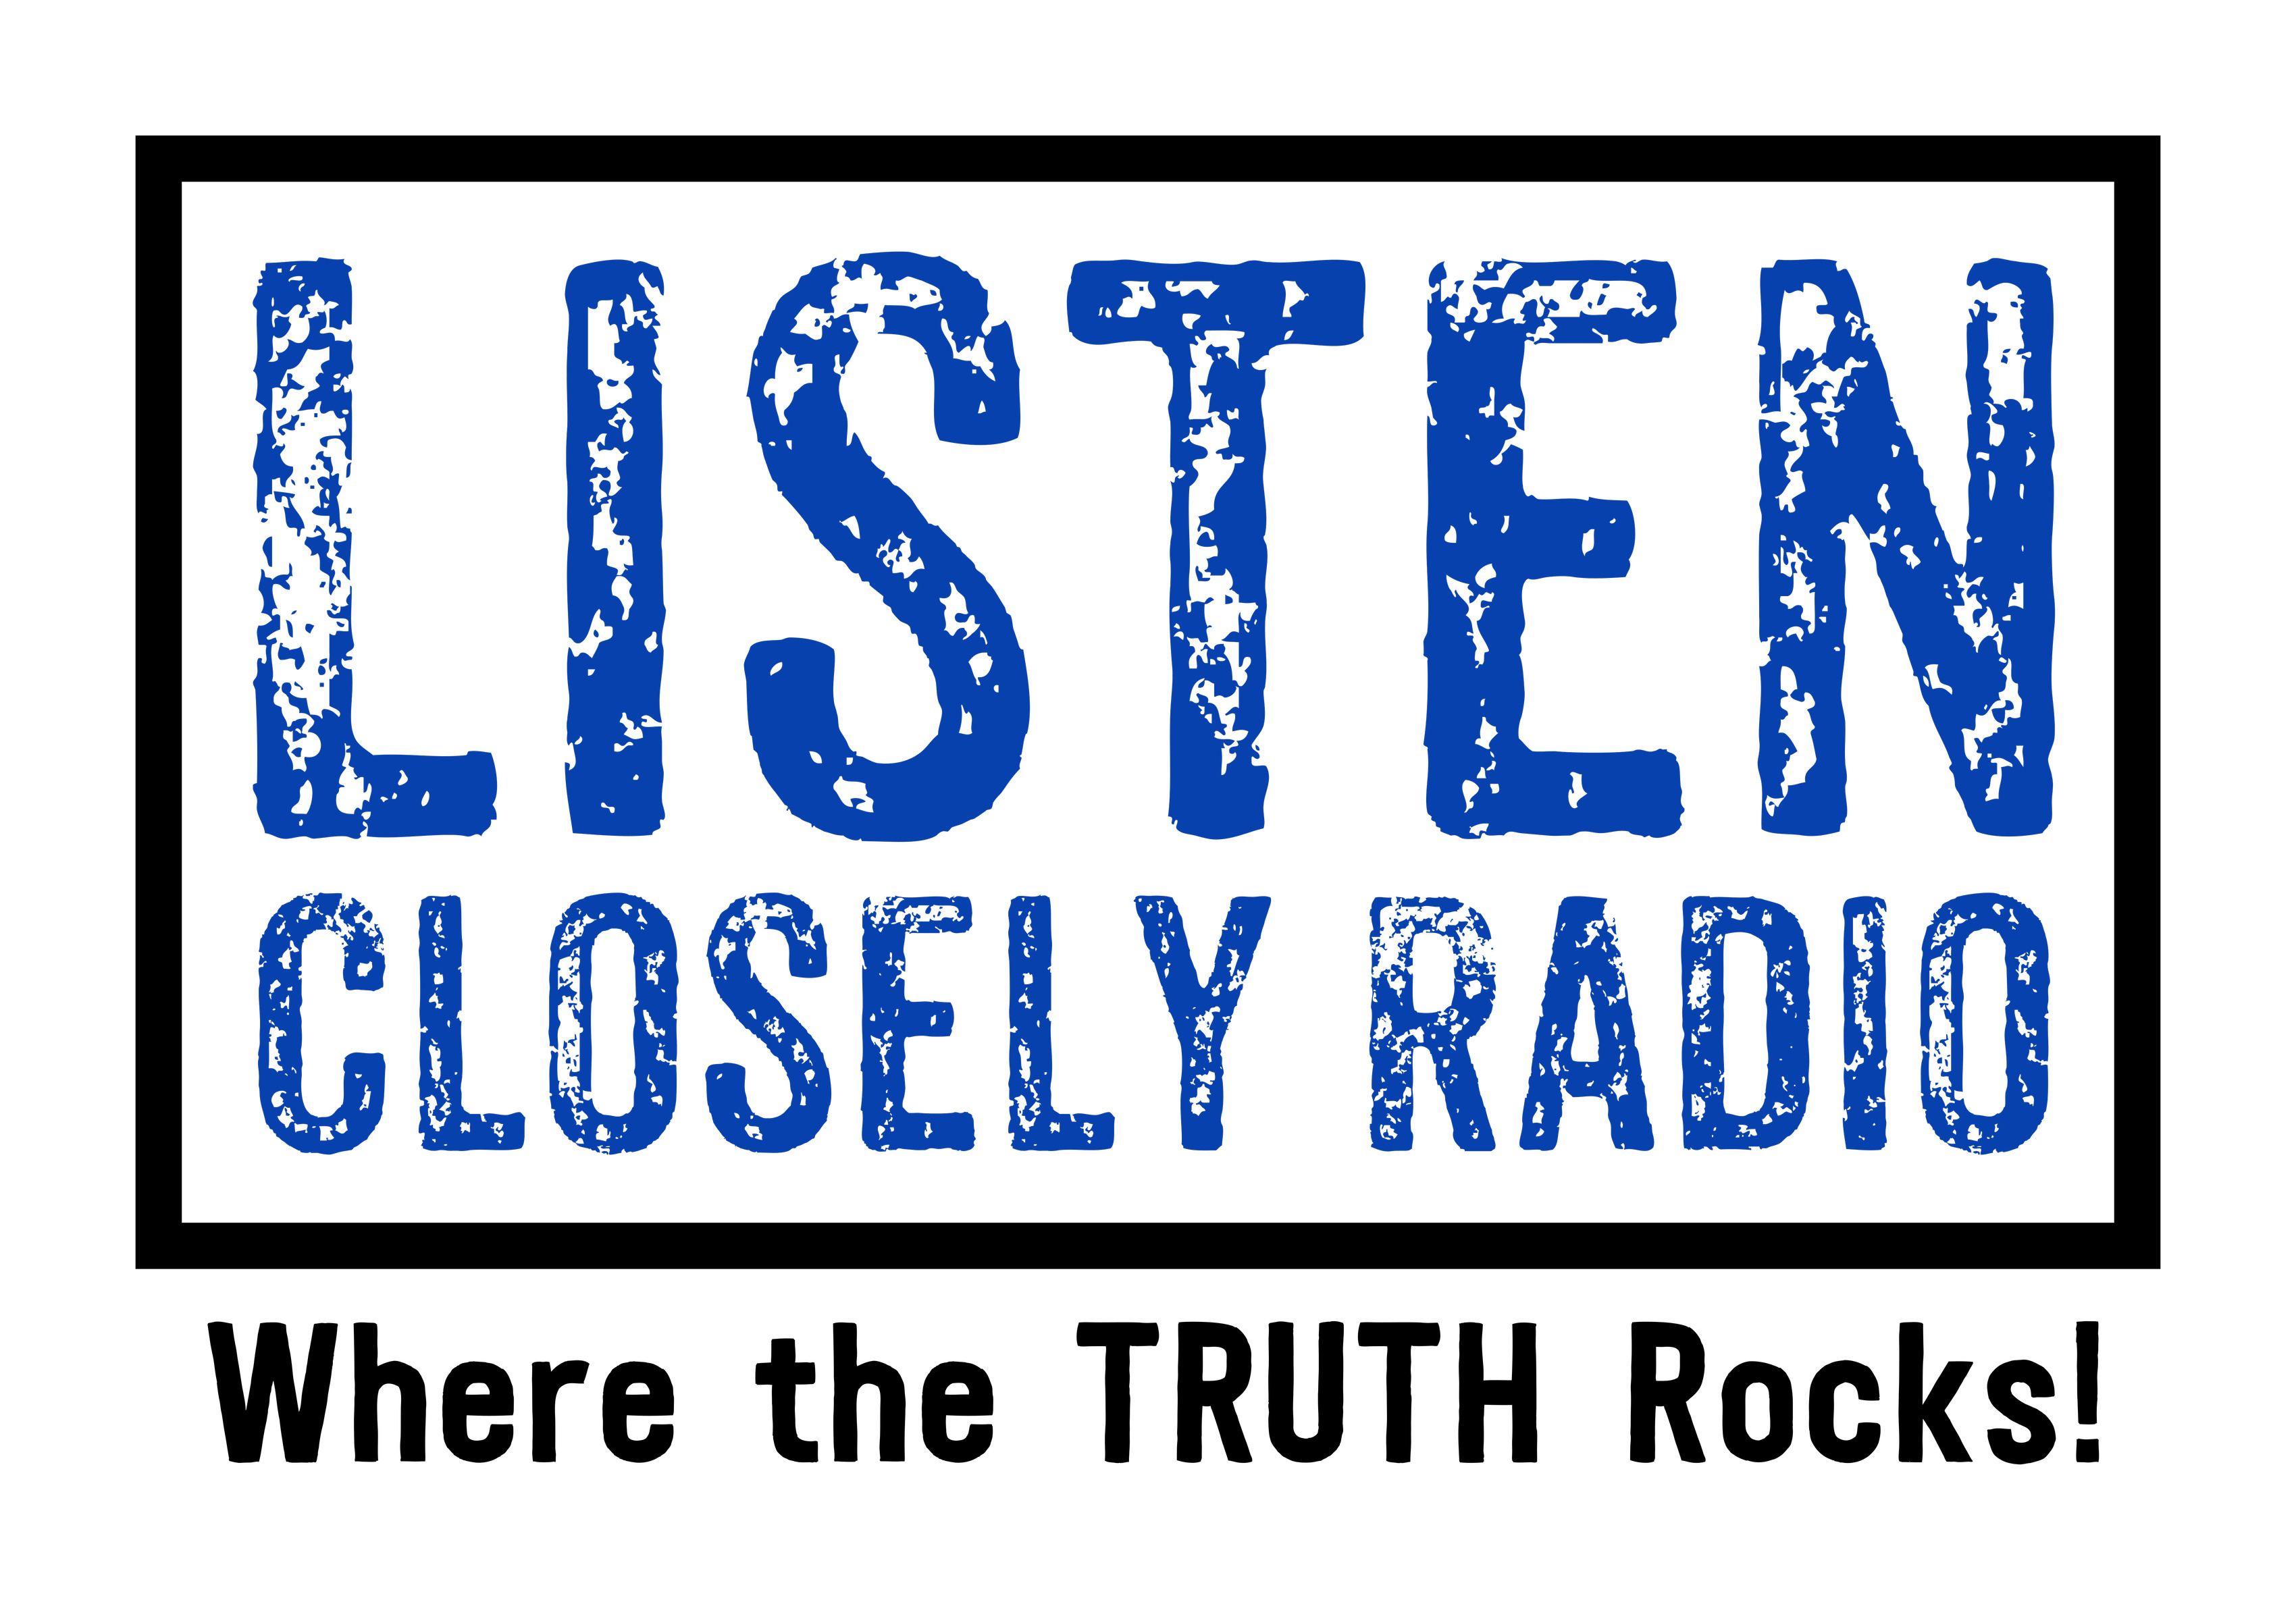 Art for Listen Closely Radio by www.listencloselyradio.com